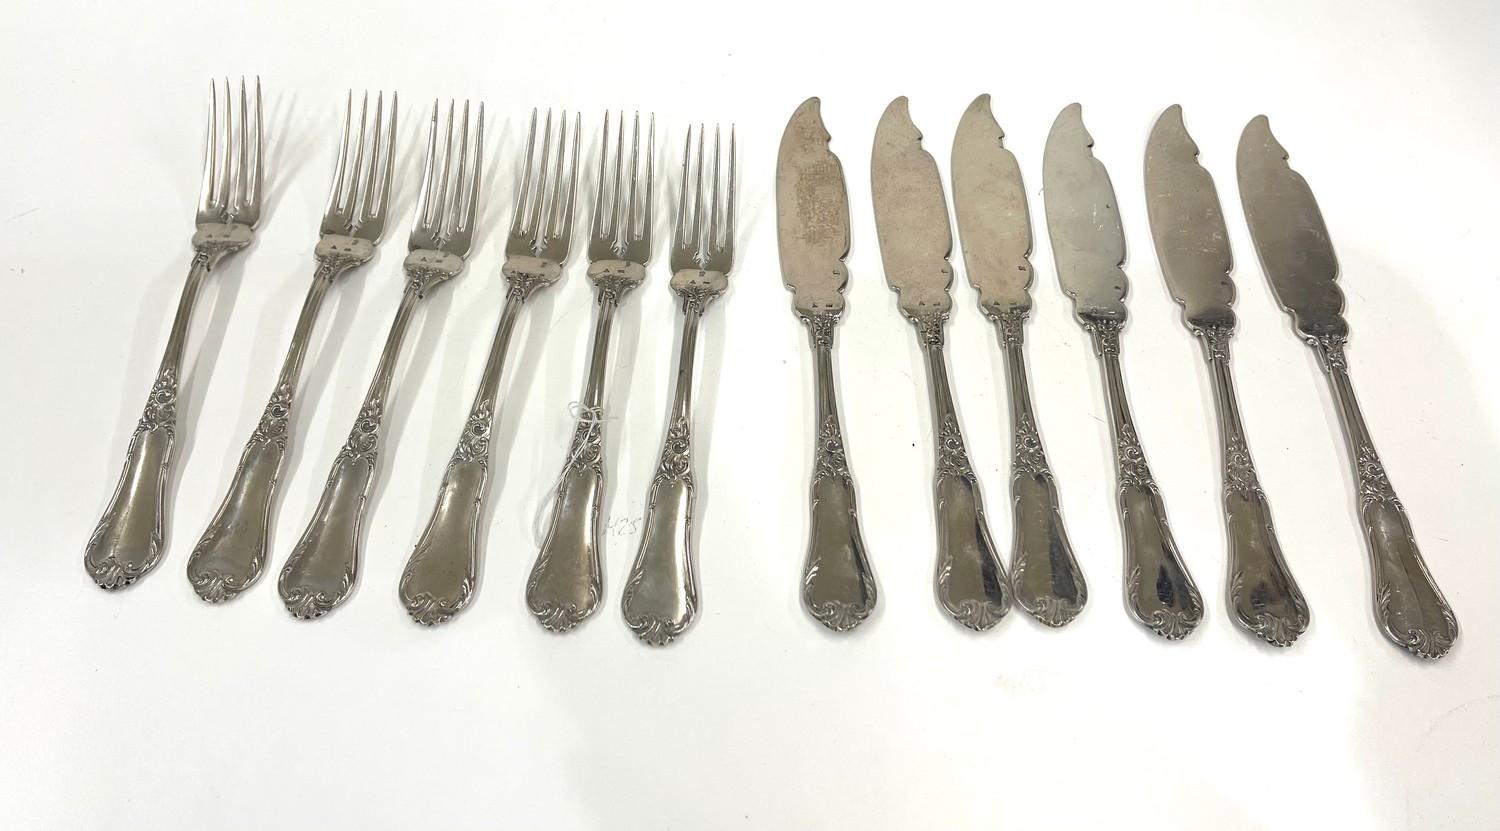 Set of Dutch silver fish knives and forks ornate floral design with Dutch silver hallmarks knives